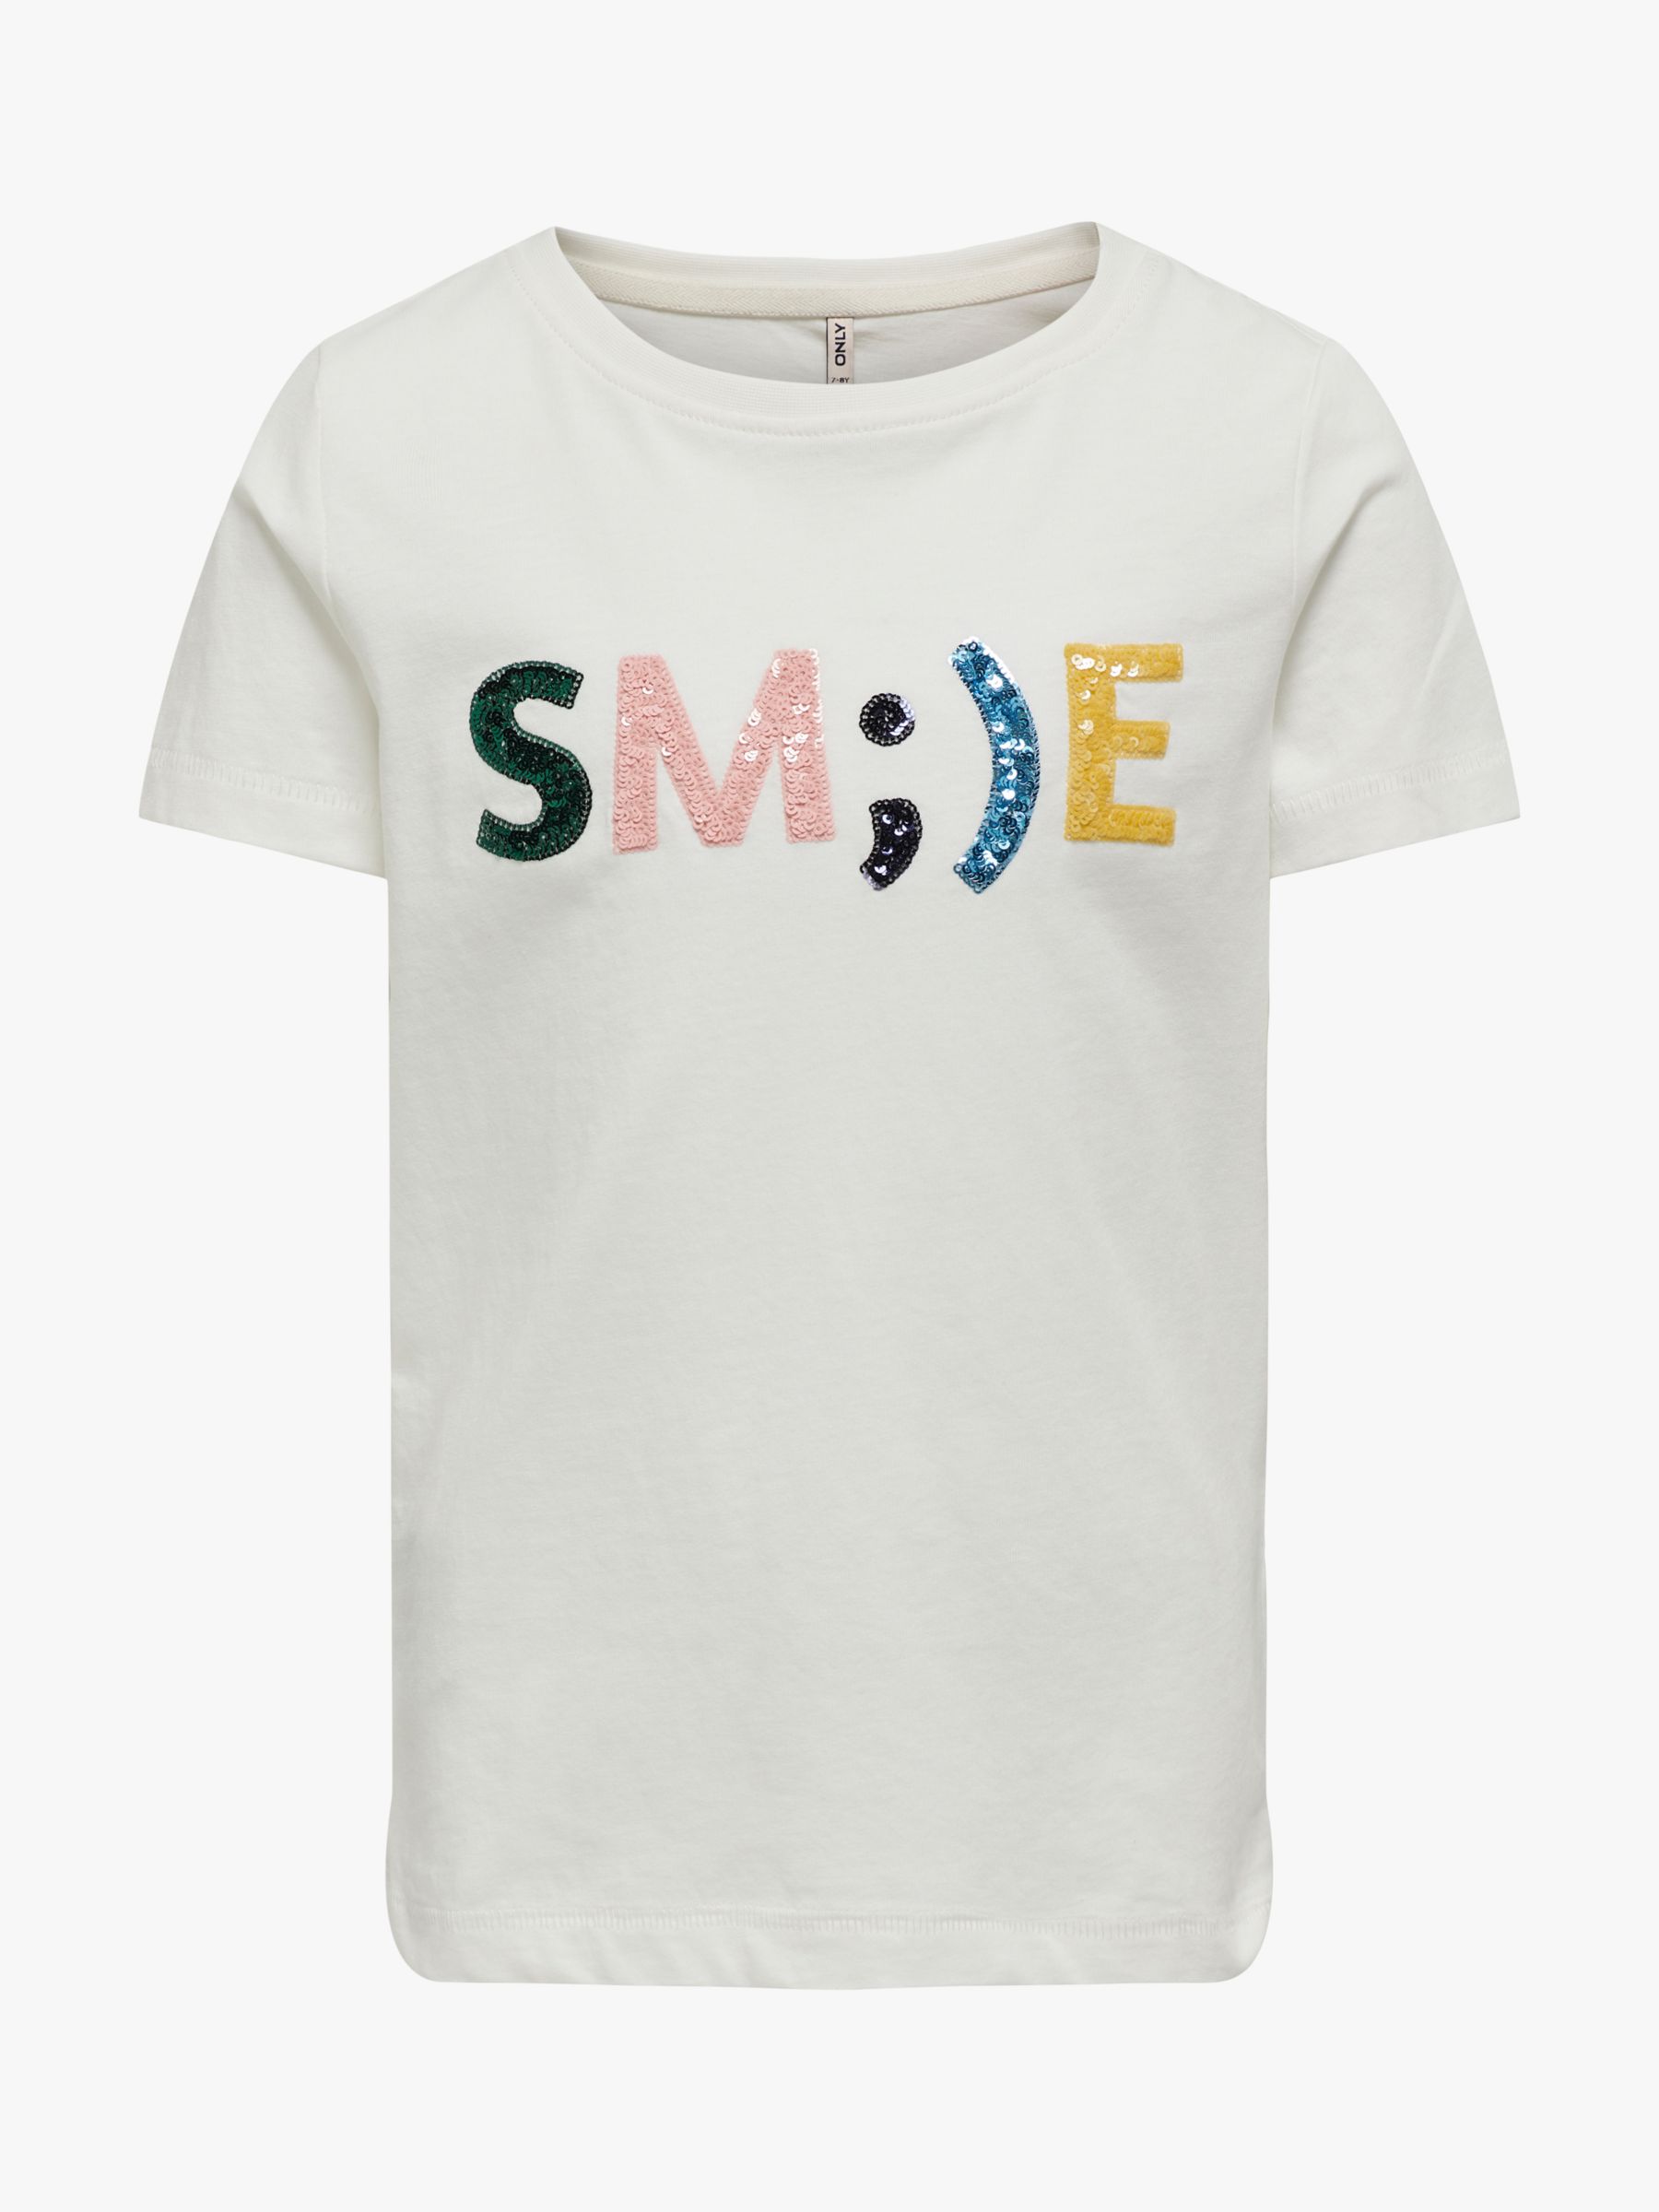 Kids ONLY Kids' Short Sleeve Smile Sequin T-Shirt, White, 11-12 years